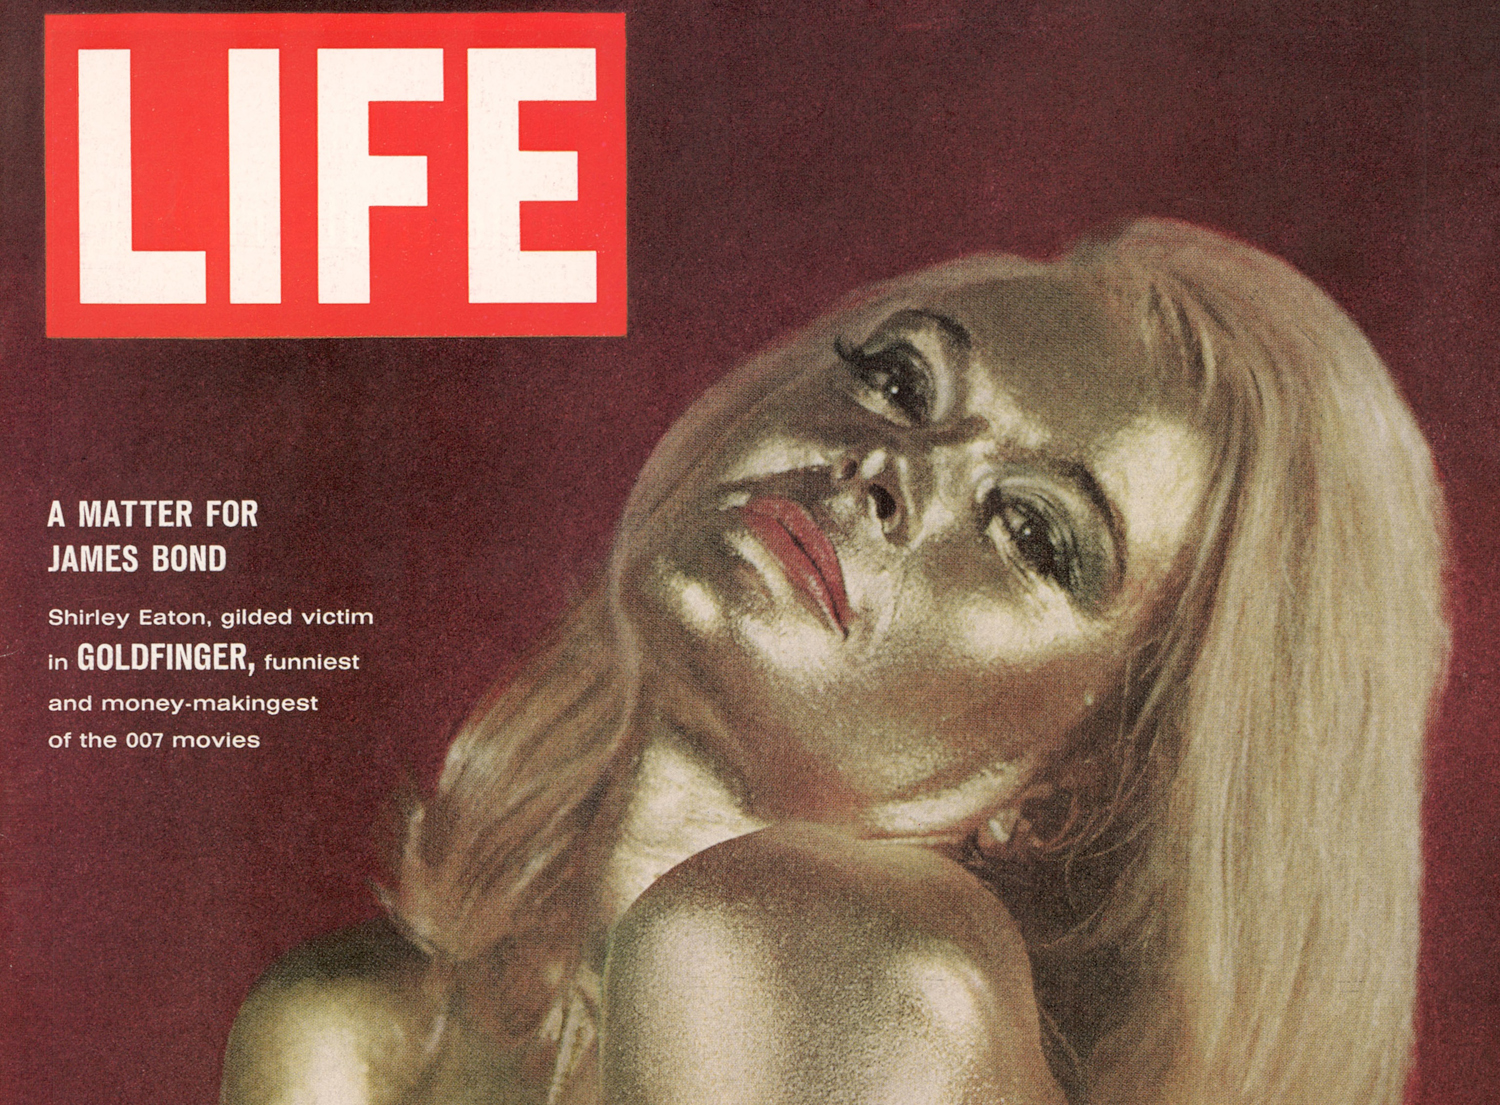 LIFE magazine cover of actress Shirley Eaton in gold body paint for the 1964 James Bond film, 